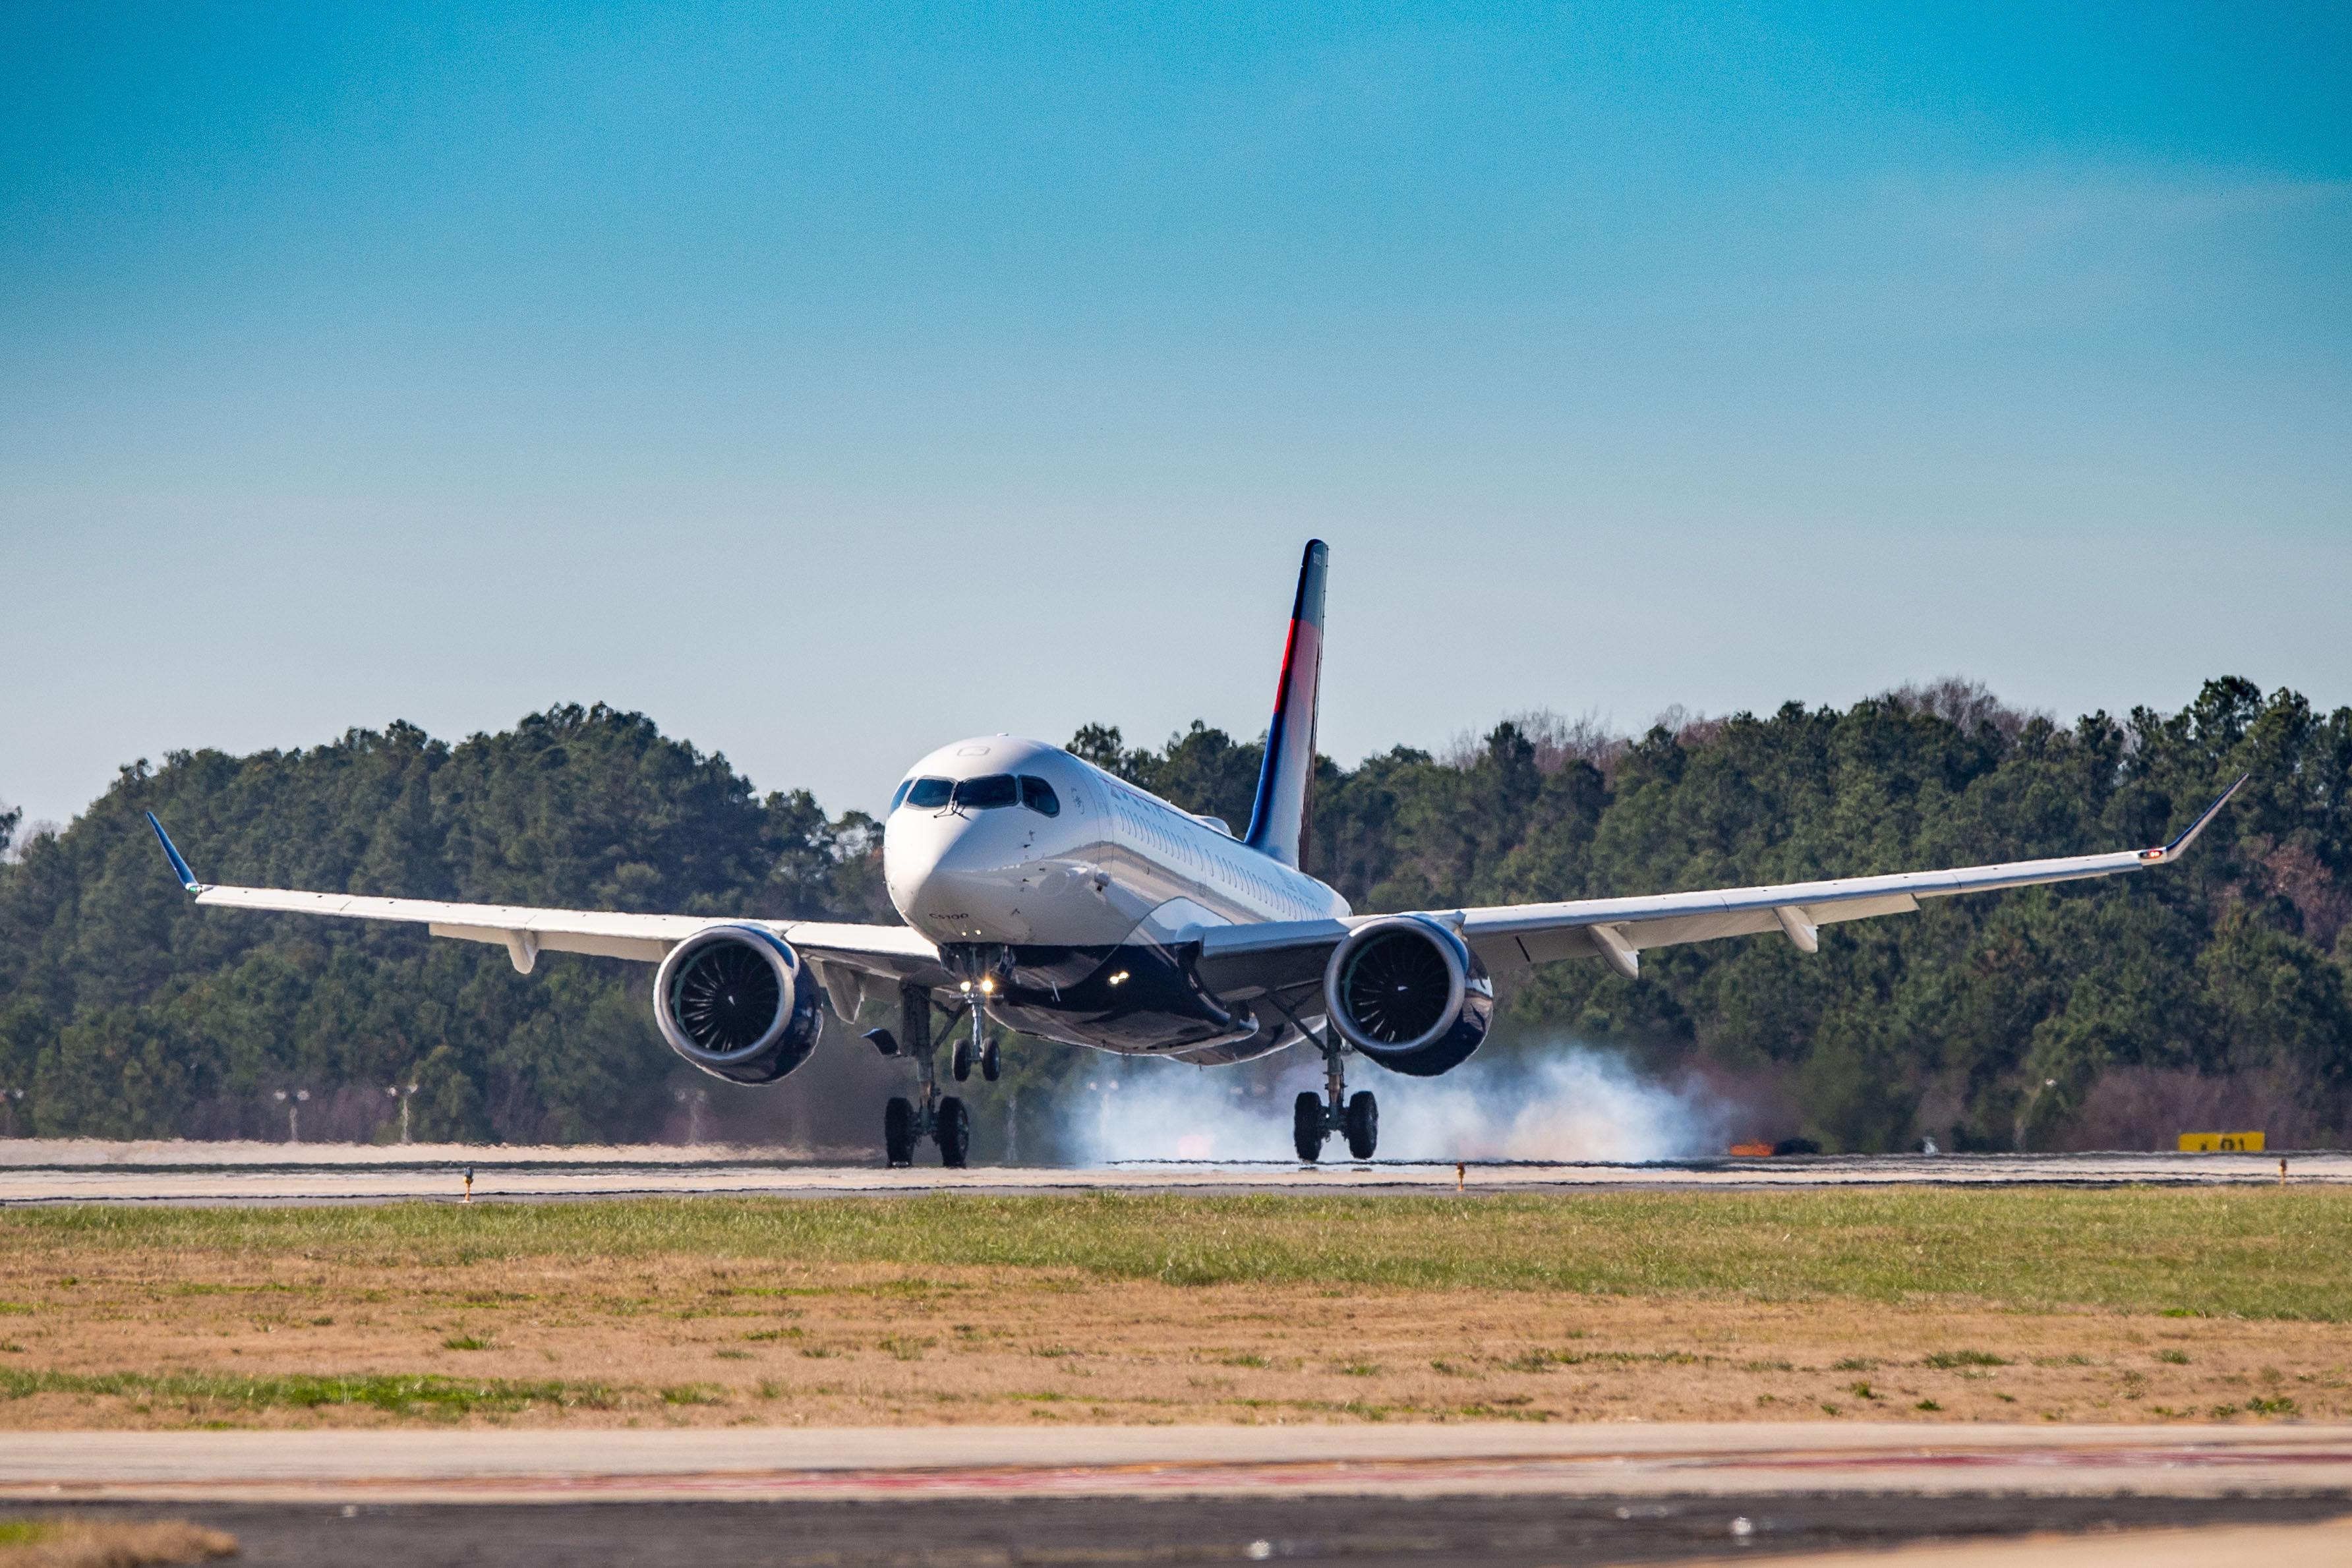 Delta A220 taking off